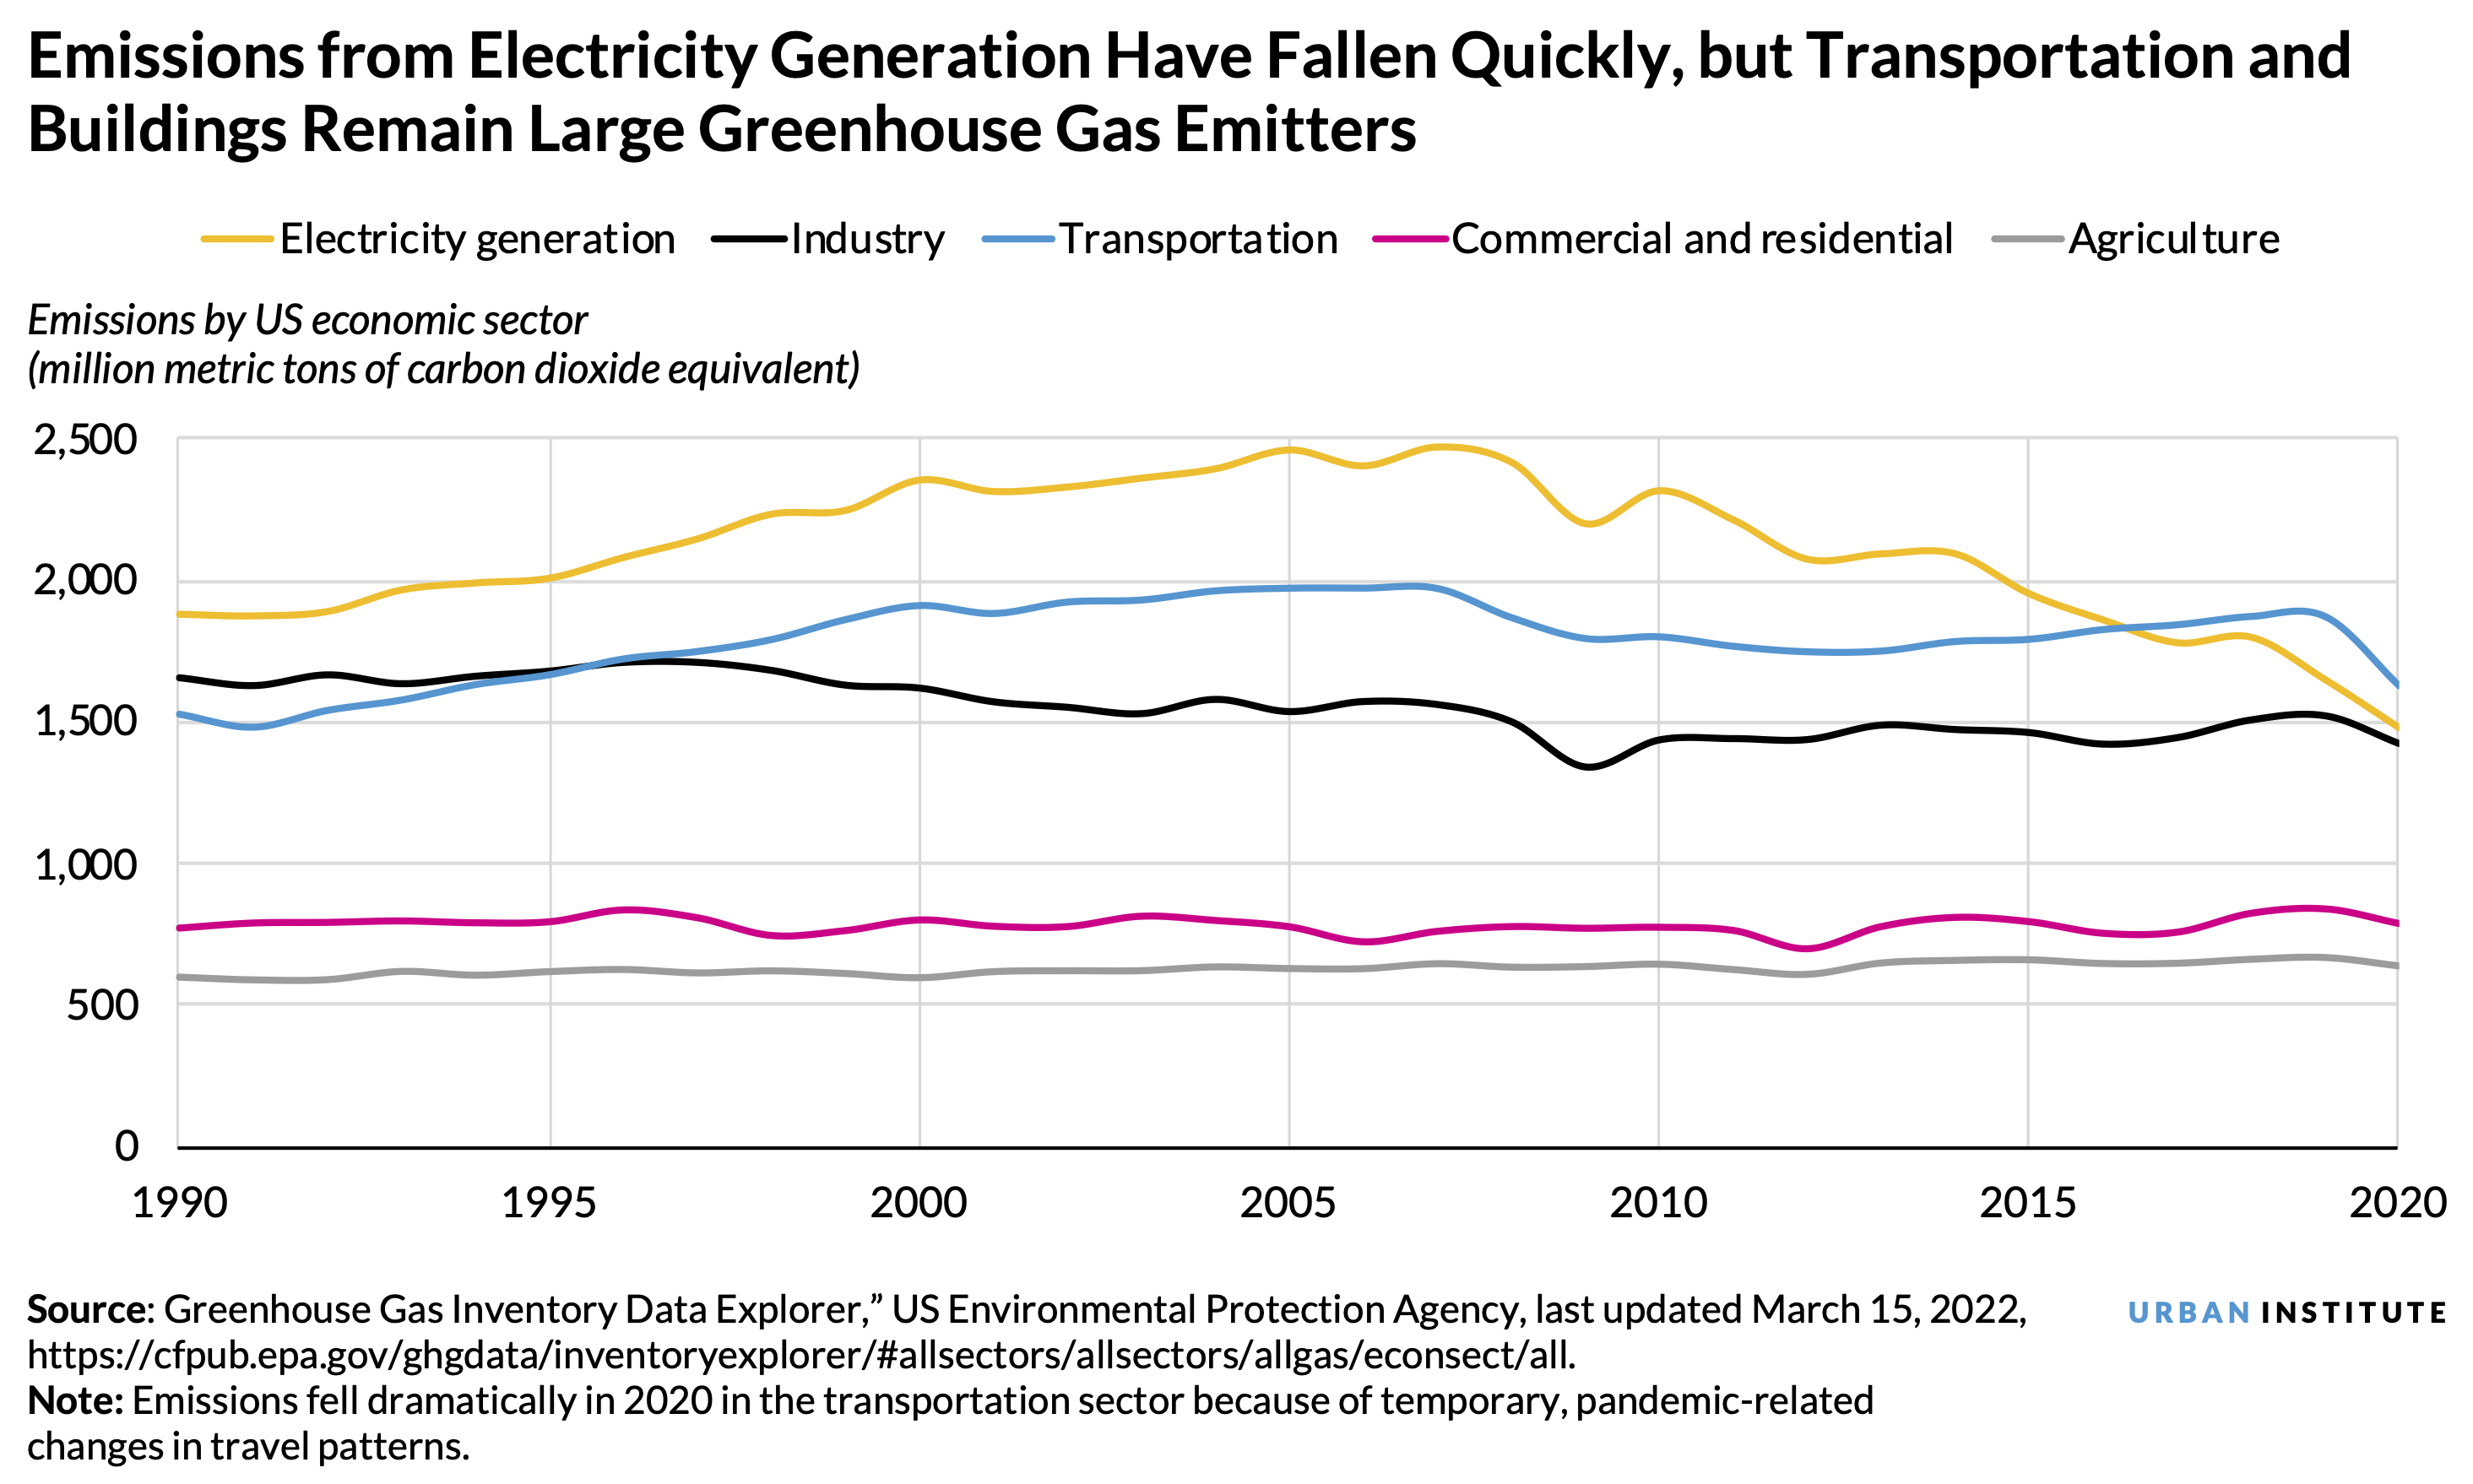 A line chart showing that emissions from electricity generation have fallen quickly but transportation and buildings remain large greenhouse gas emitters